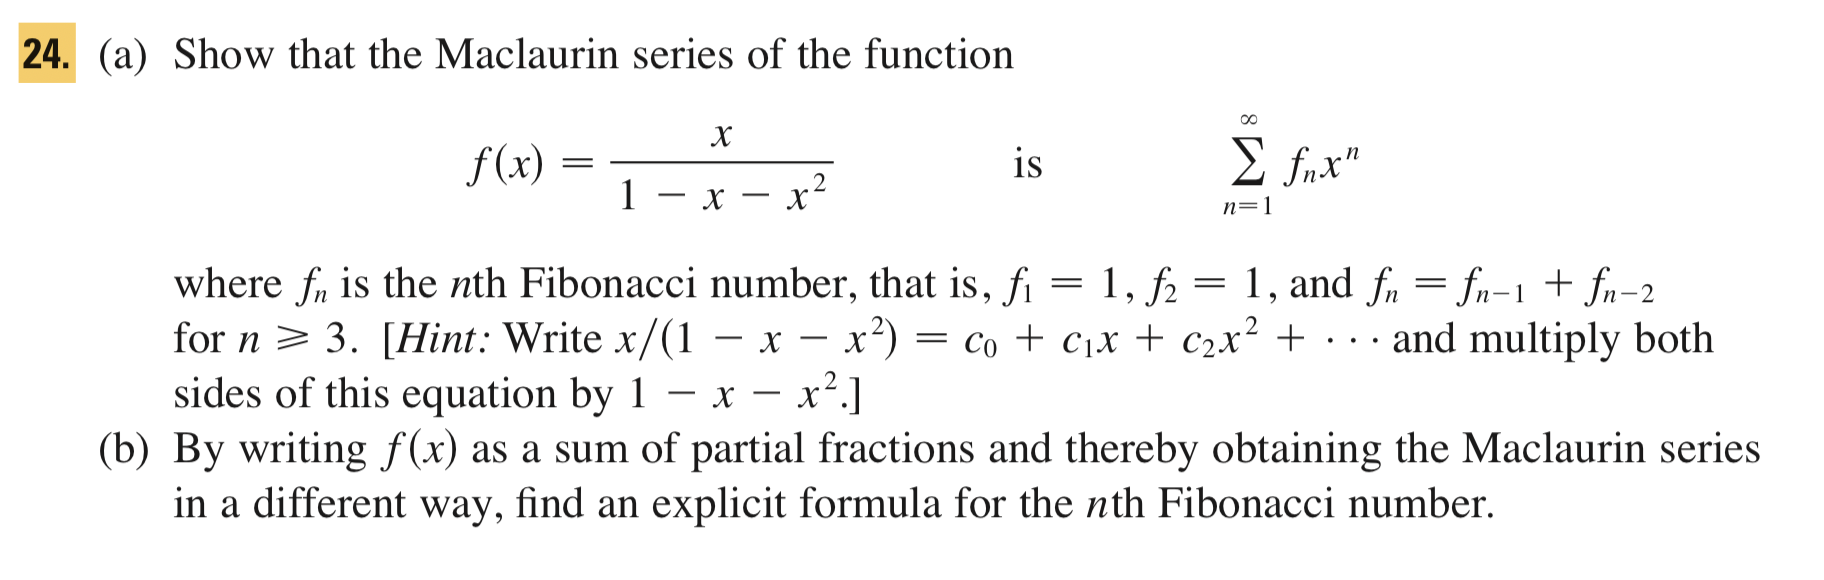 (a) Show that the Maclaurin series of the function
f(x) =
is
E fnx"
1 – x – x?
-
n=1
where fr is the nth Fibonacci number, that is, fi = 1, f2
for n > 3. [Hint: Write x/(1 - x – x²) = co + c,x + c2x² + · . . and multiply both
sides of this equation by 1 – x – x².]
(b) By writing f(x) as a sum of partial fractions and thereby obtaining the Maclaurin series
in a different way, find an explicit formula for the nth Fibonacci number.
1, and fn = fn-1 + fn-2
=
-
